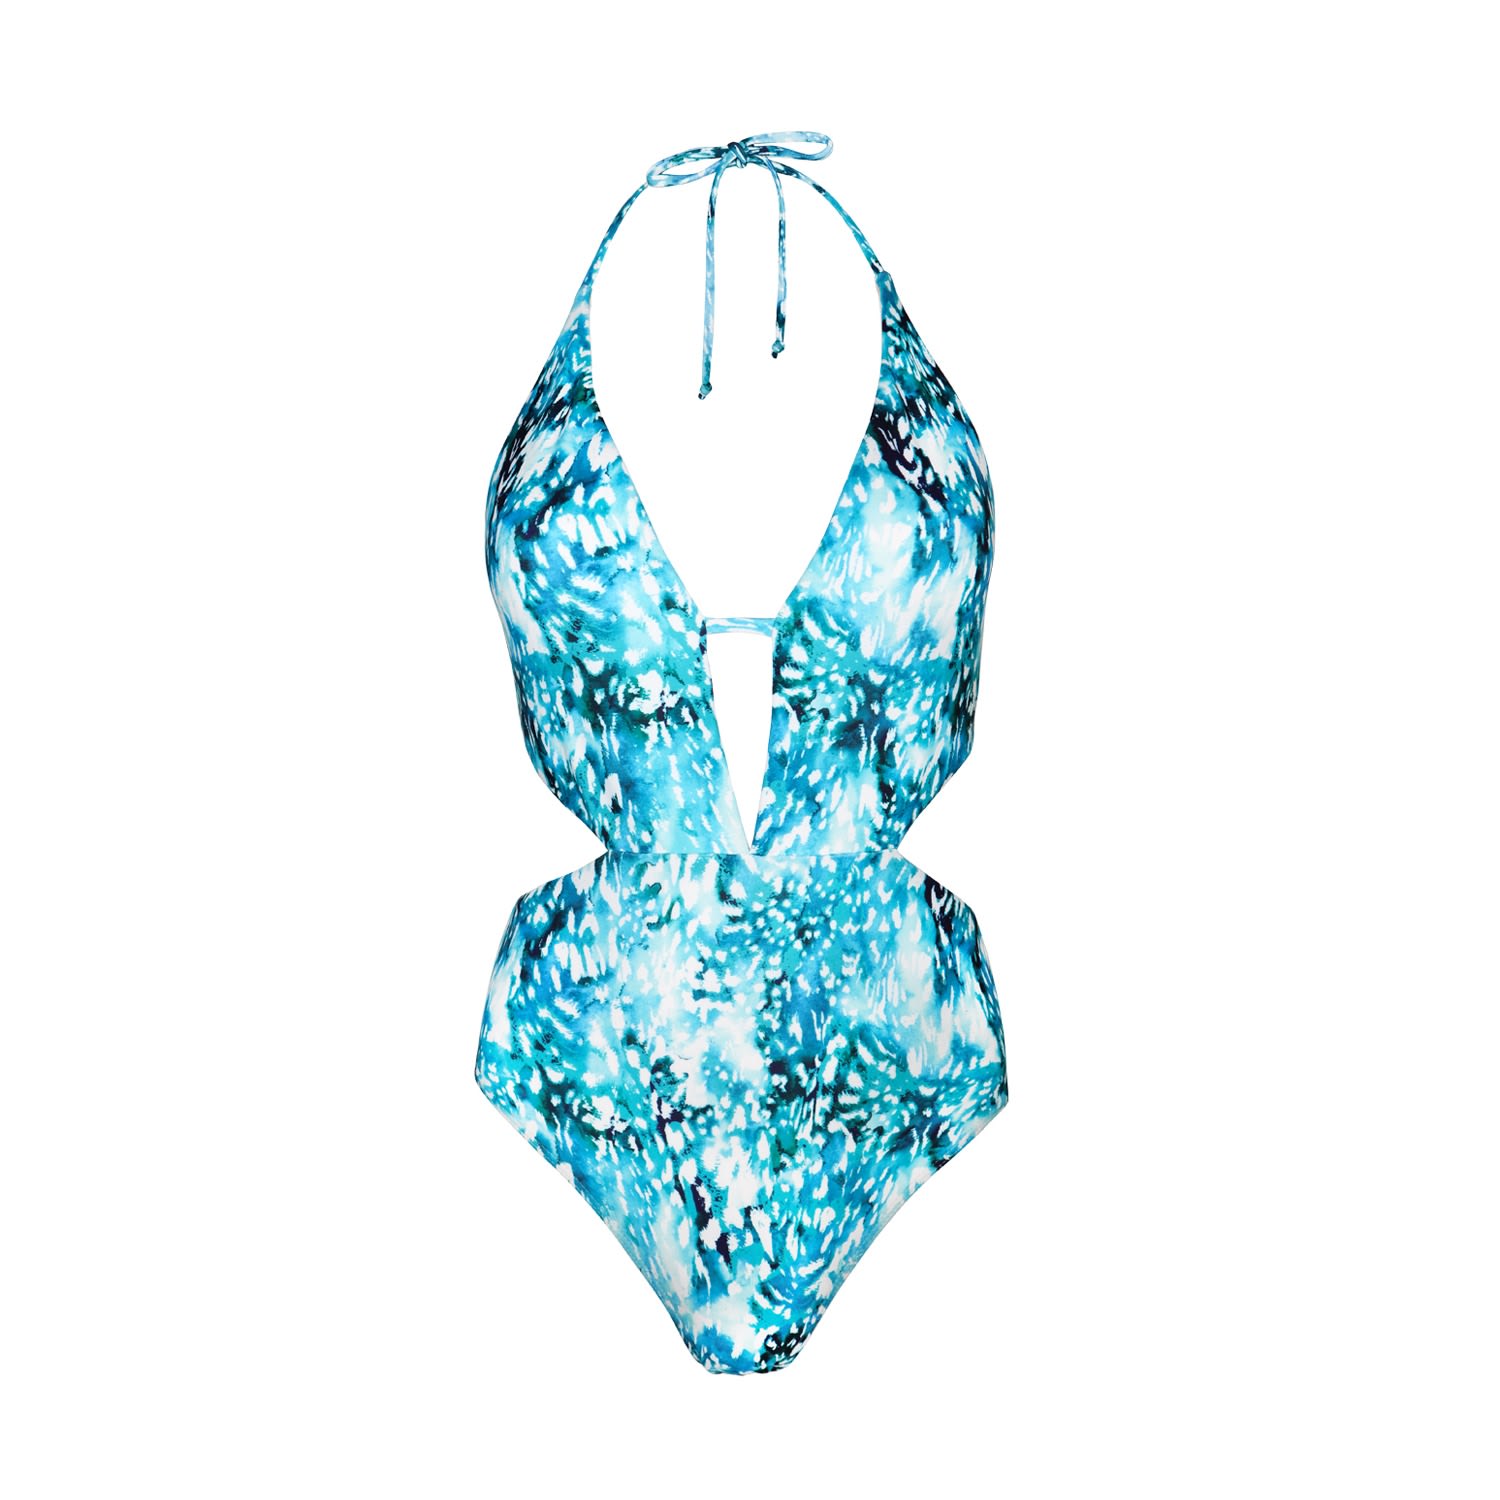 Women's Blue Cheetah Cut Out One Piece Extra Small AquaJelly